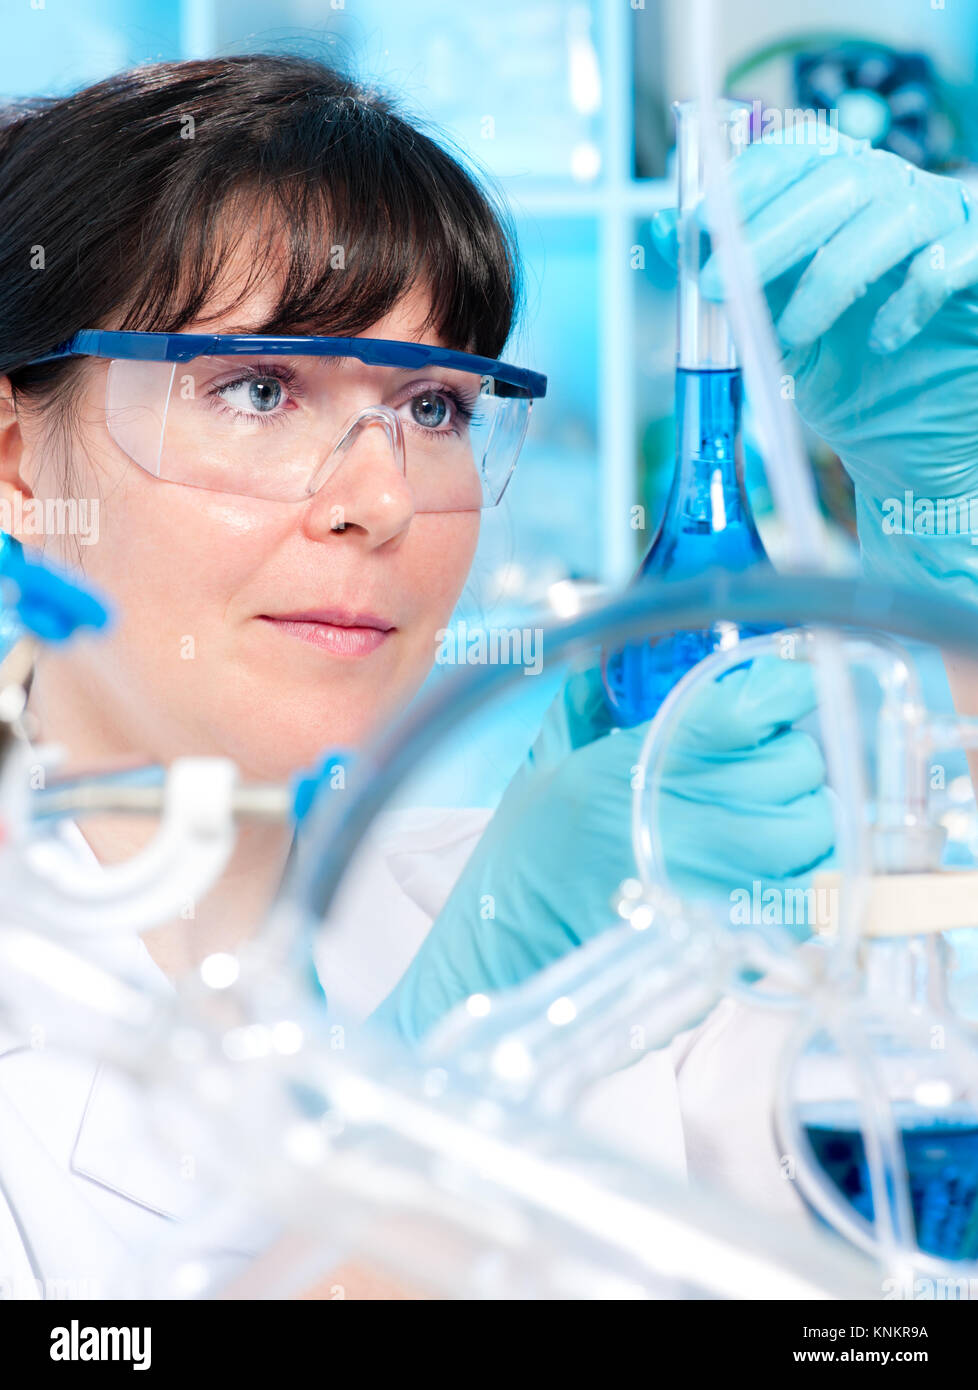 Female tech in protective wear works in chemical lab Stock Photo